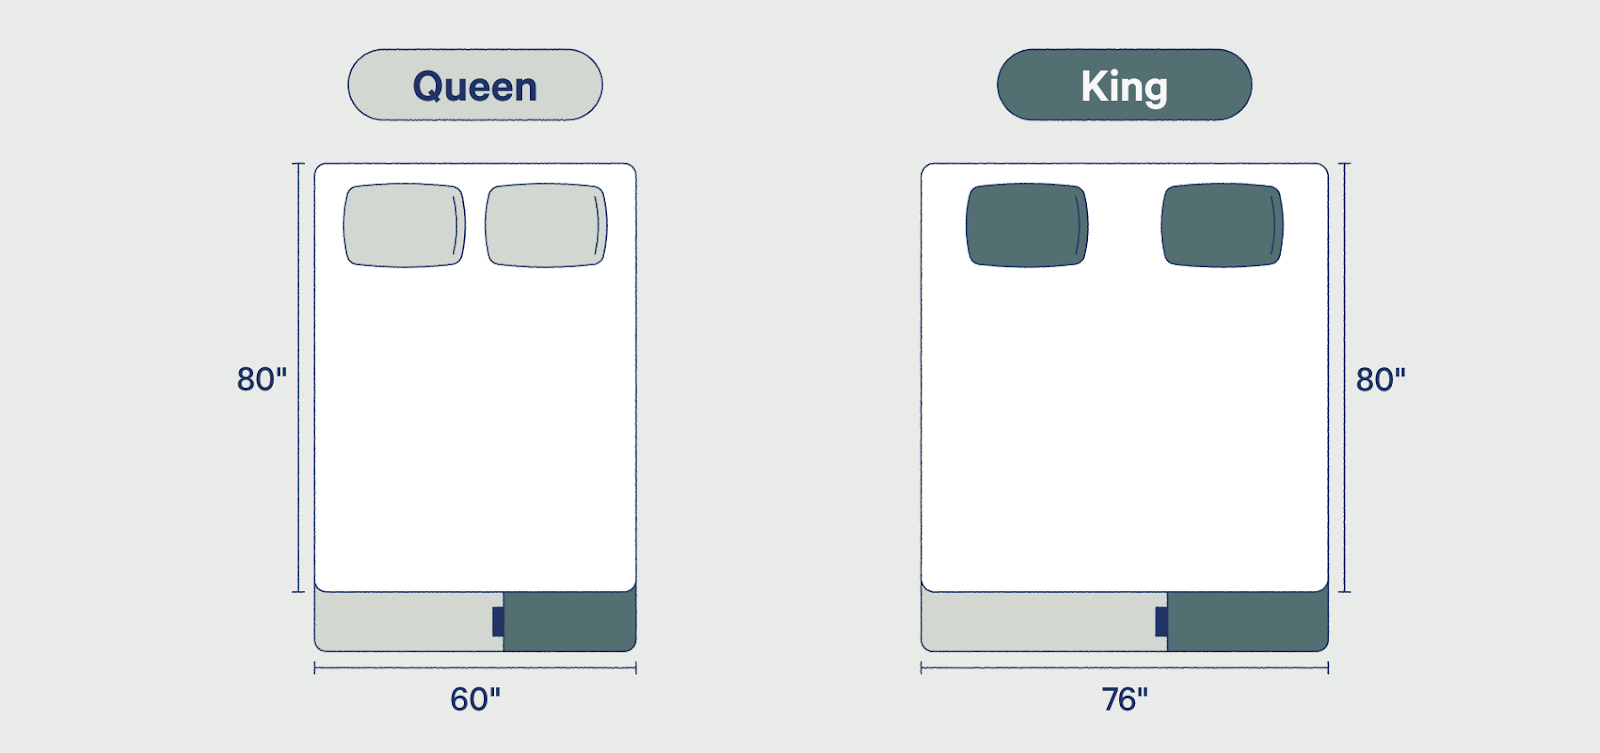 King Vs Queen Bed Size And Comparison, How Many Inches Across Is A King Size Bed